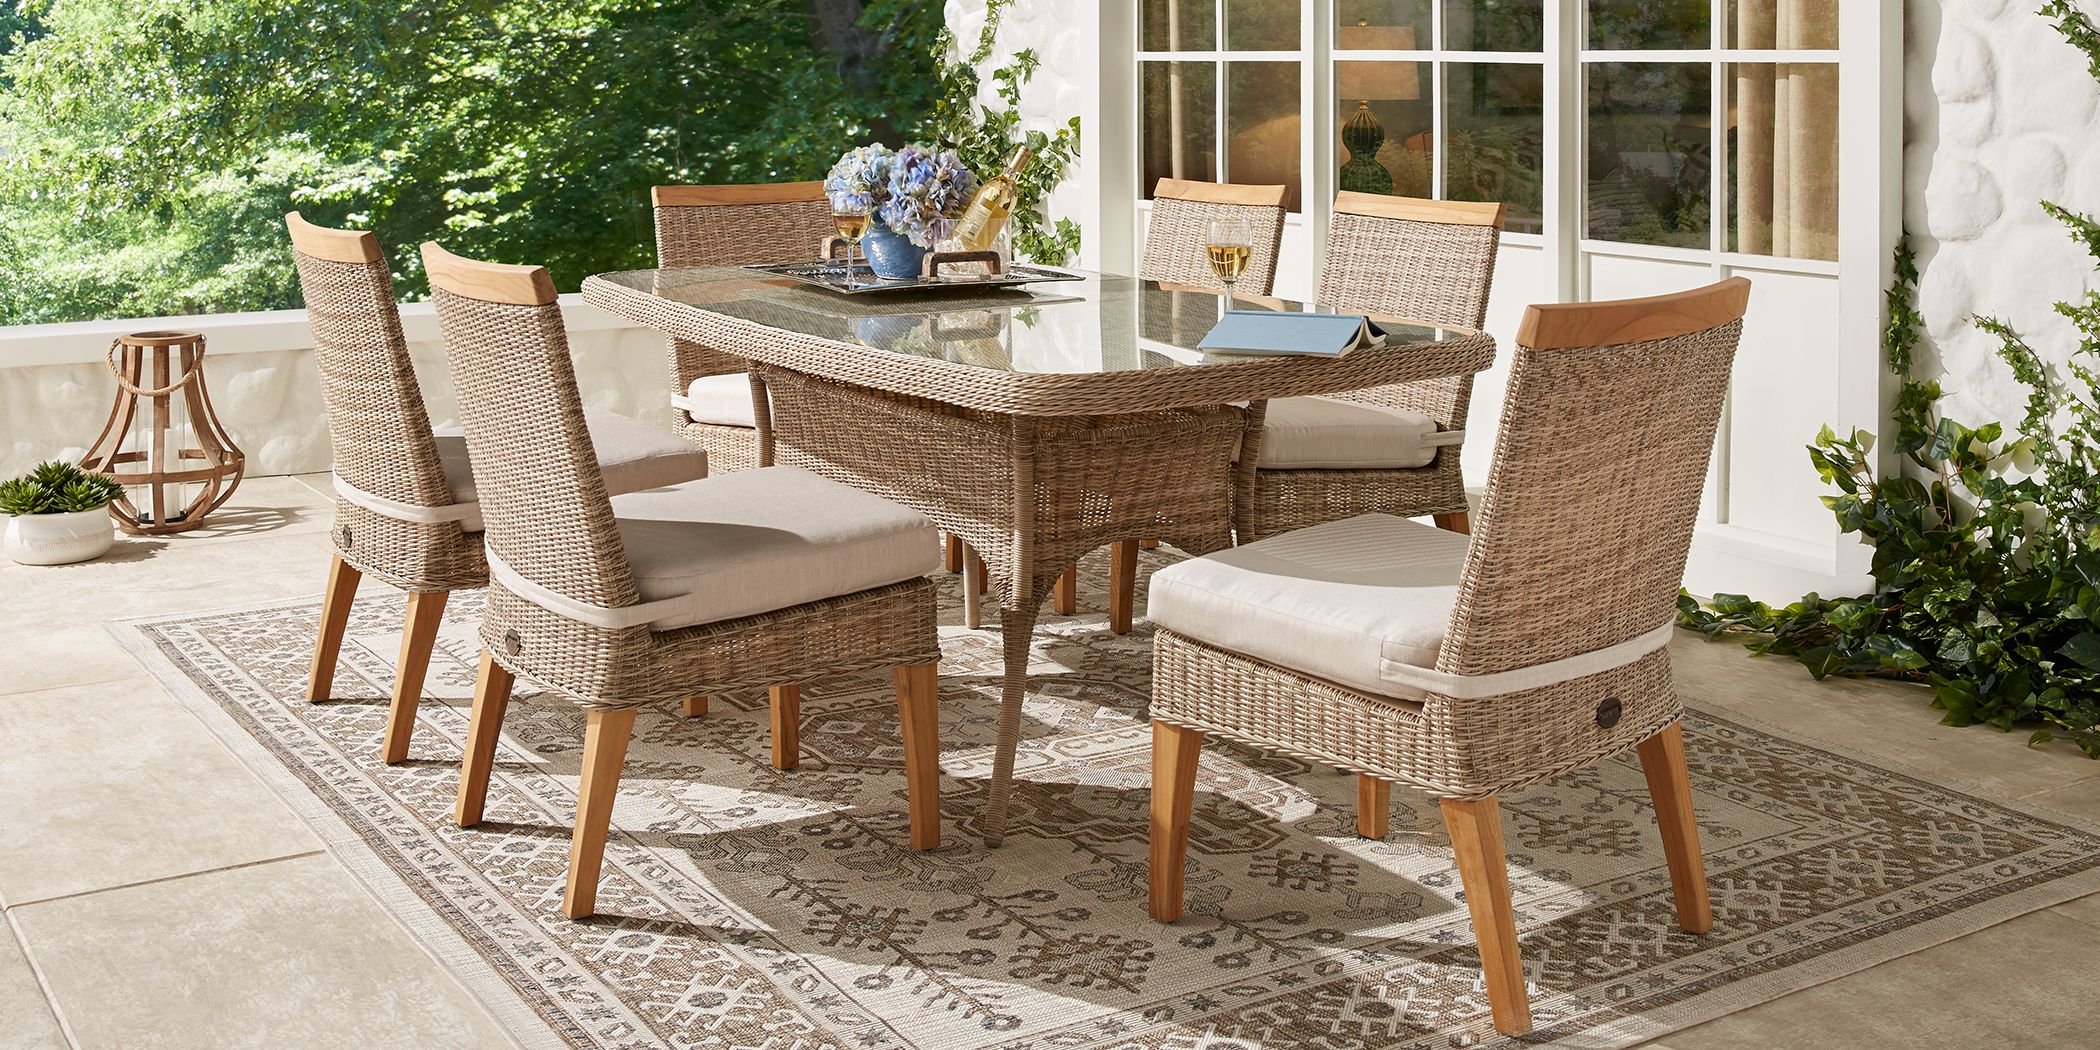 Wicker 7 Piece Patio Dining Sets, Wooden Outdoor Dining Set With Cushions